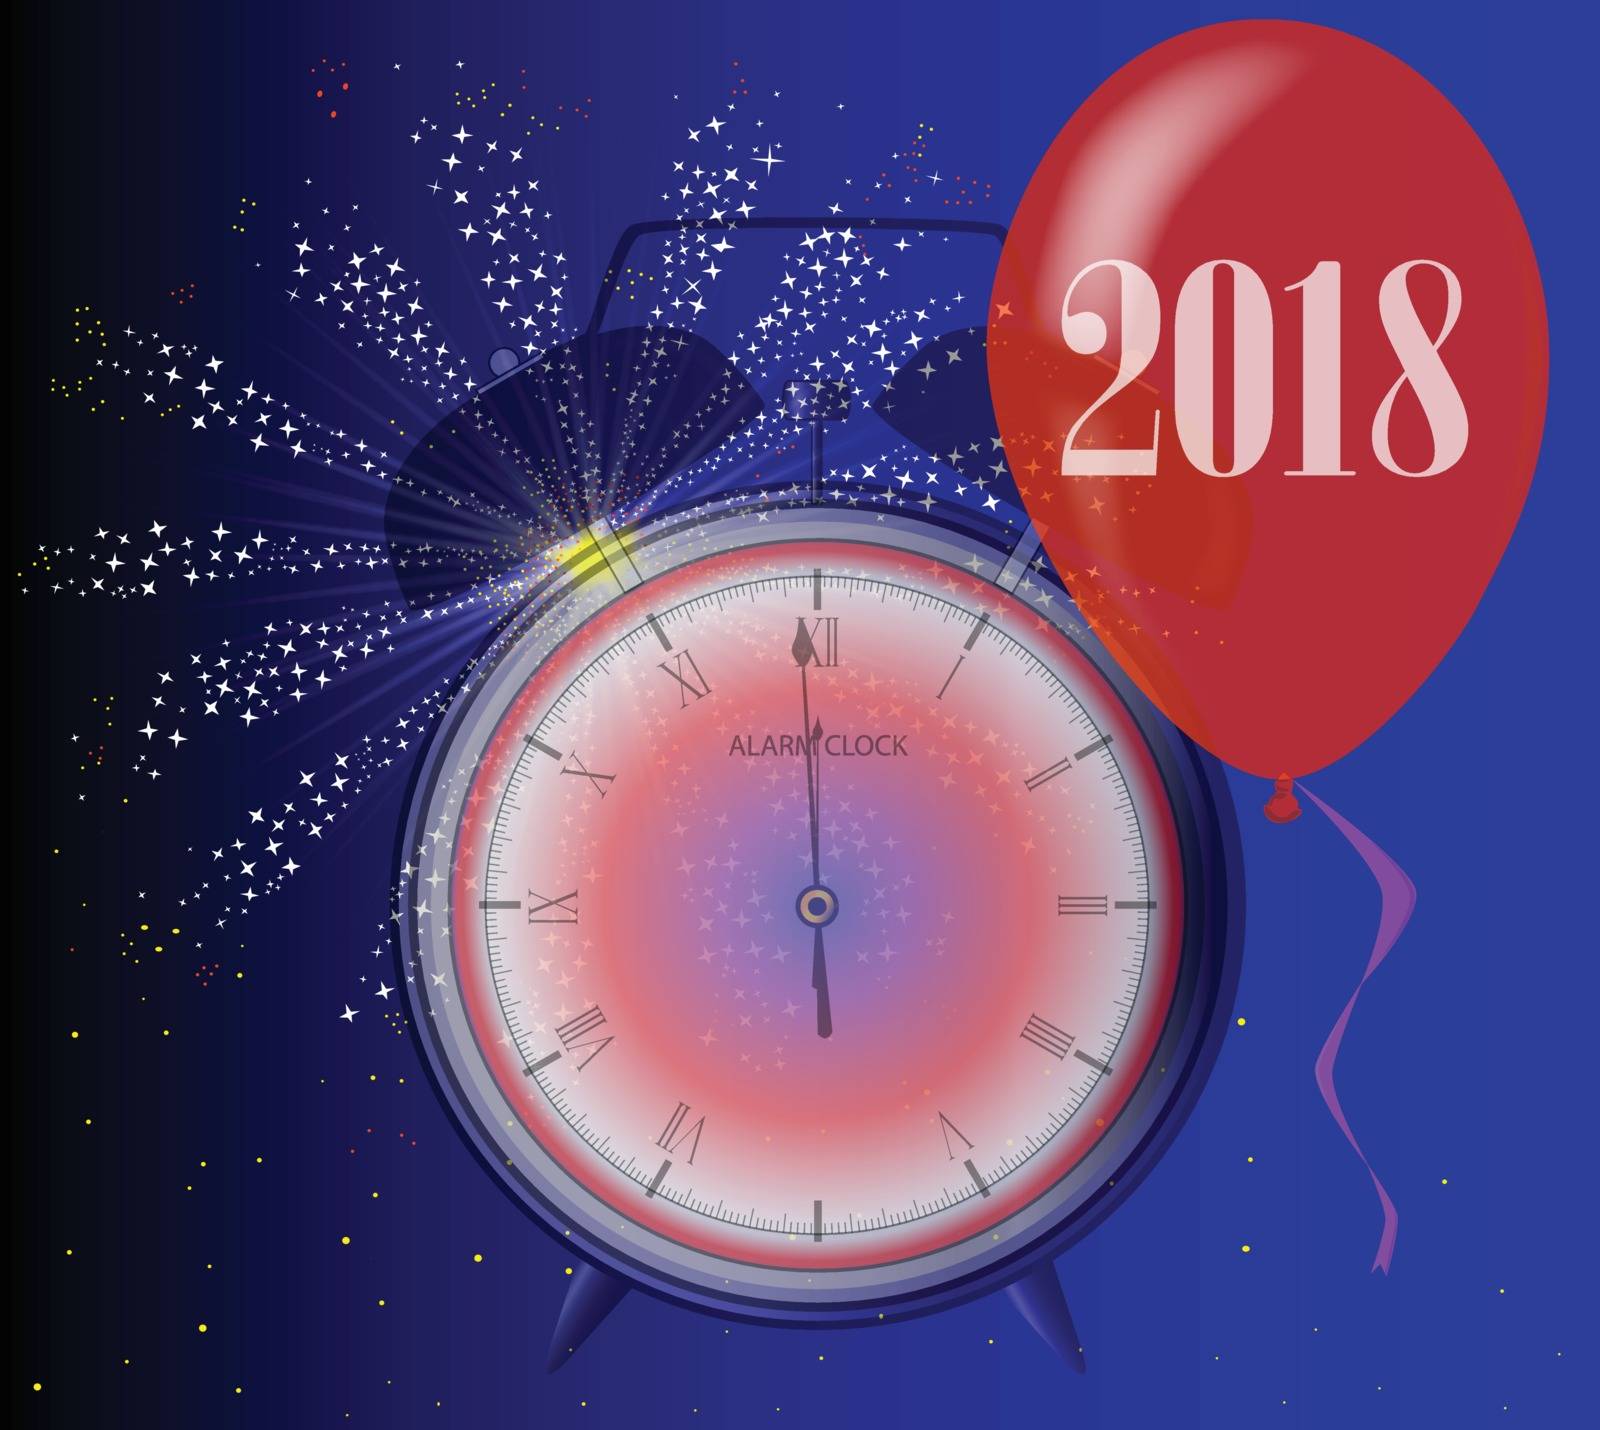 A 2018 midnight clock with balloon and firework explosion.